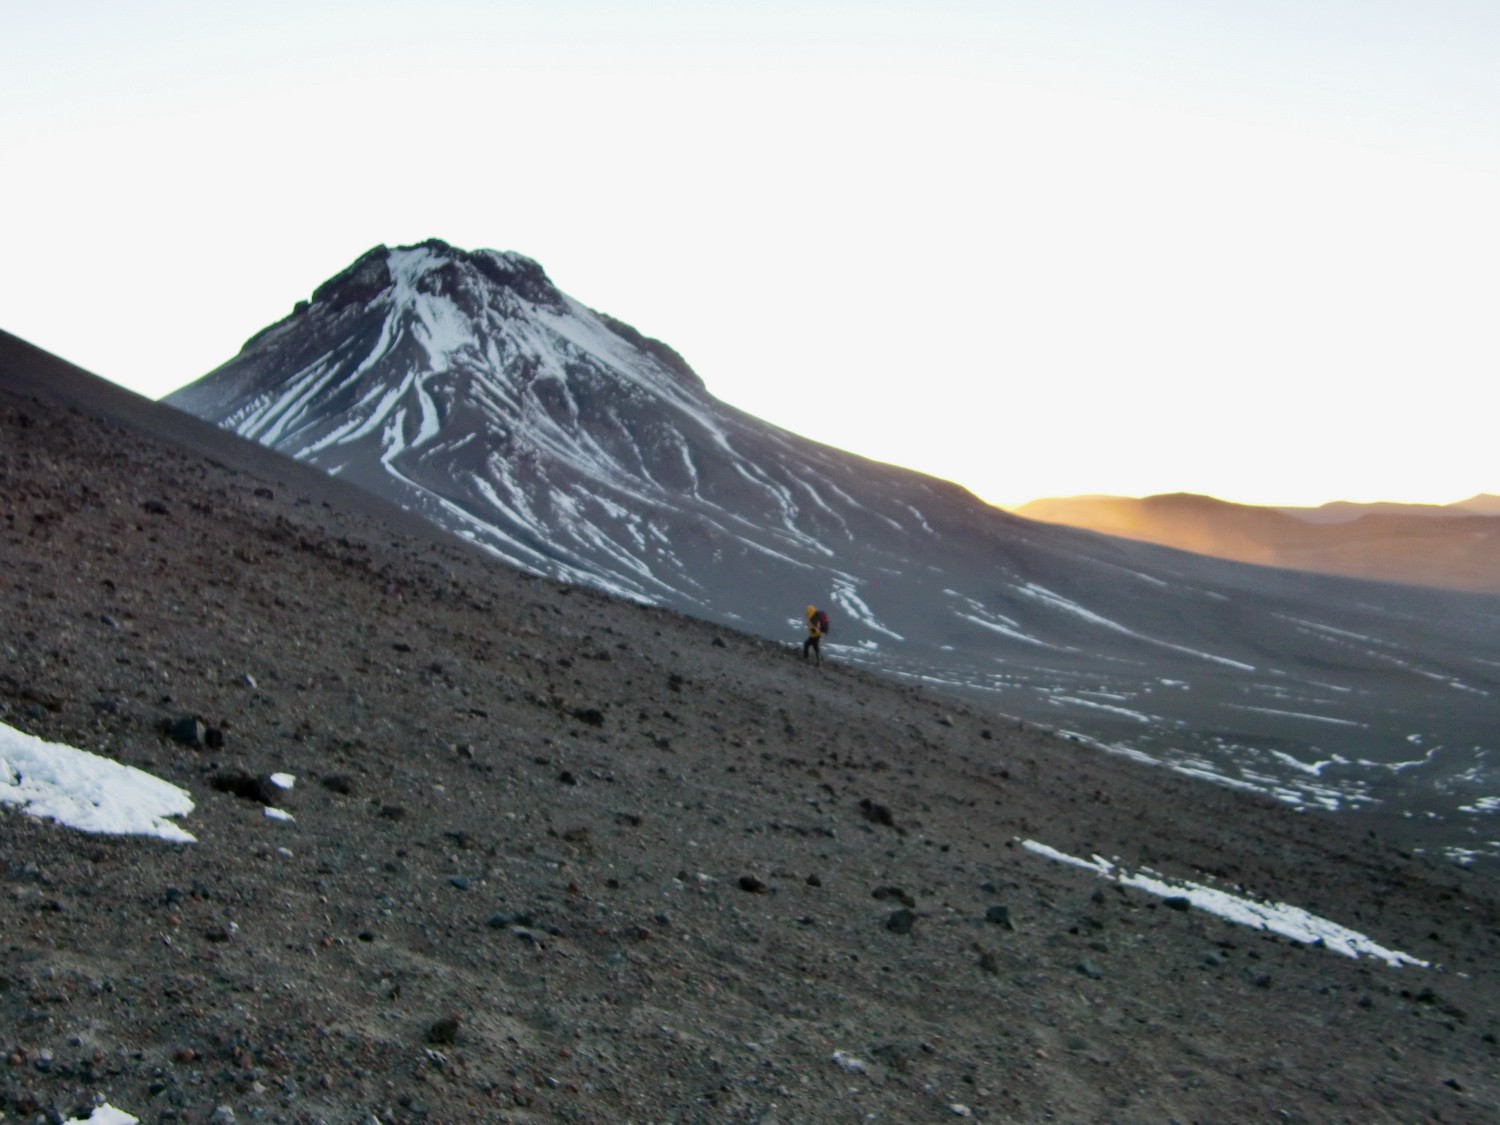 The way up to Lascar - Volcano Aguas Caliente on the right side